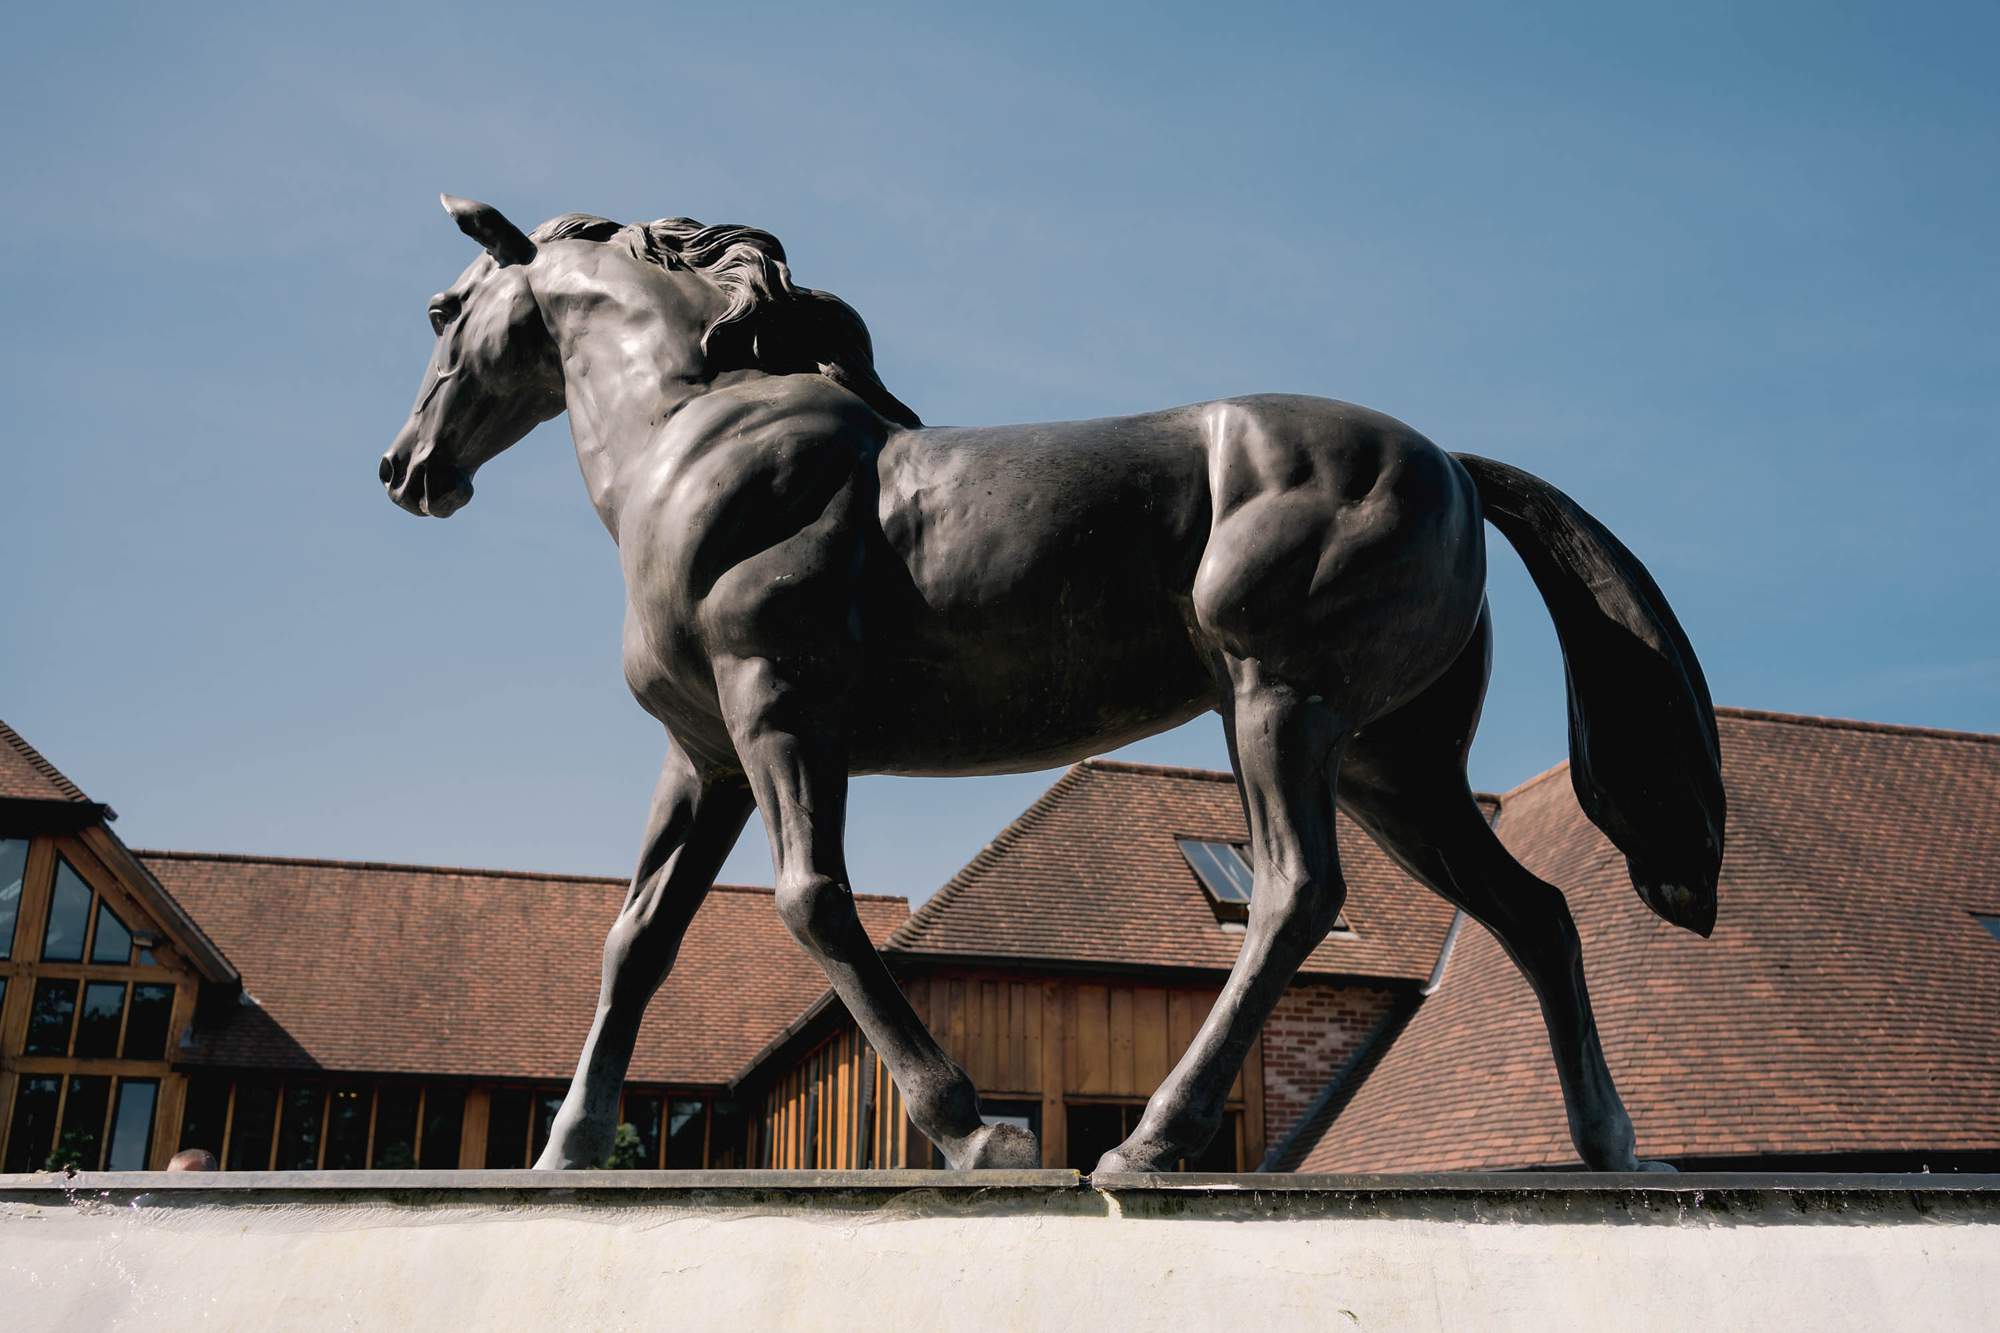 A statue of a black horse outside Old Thorns Hotel in Liphook, Hampshire.